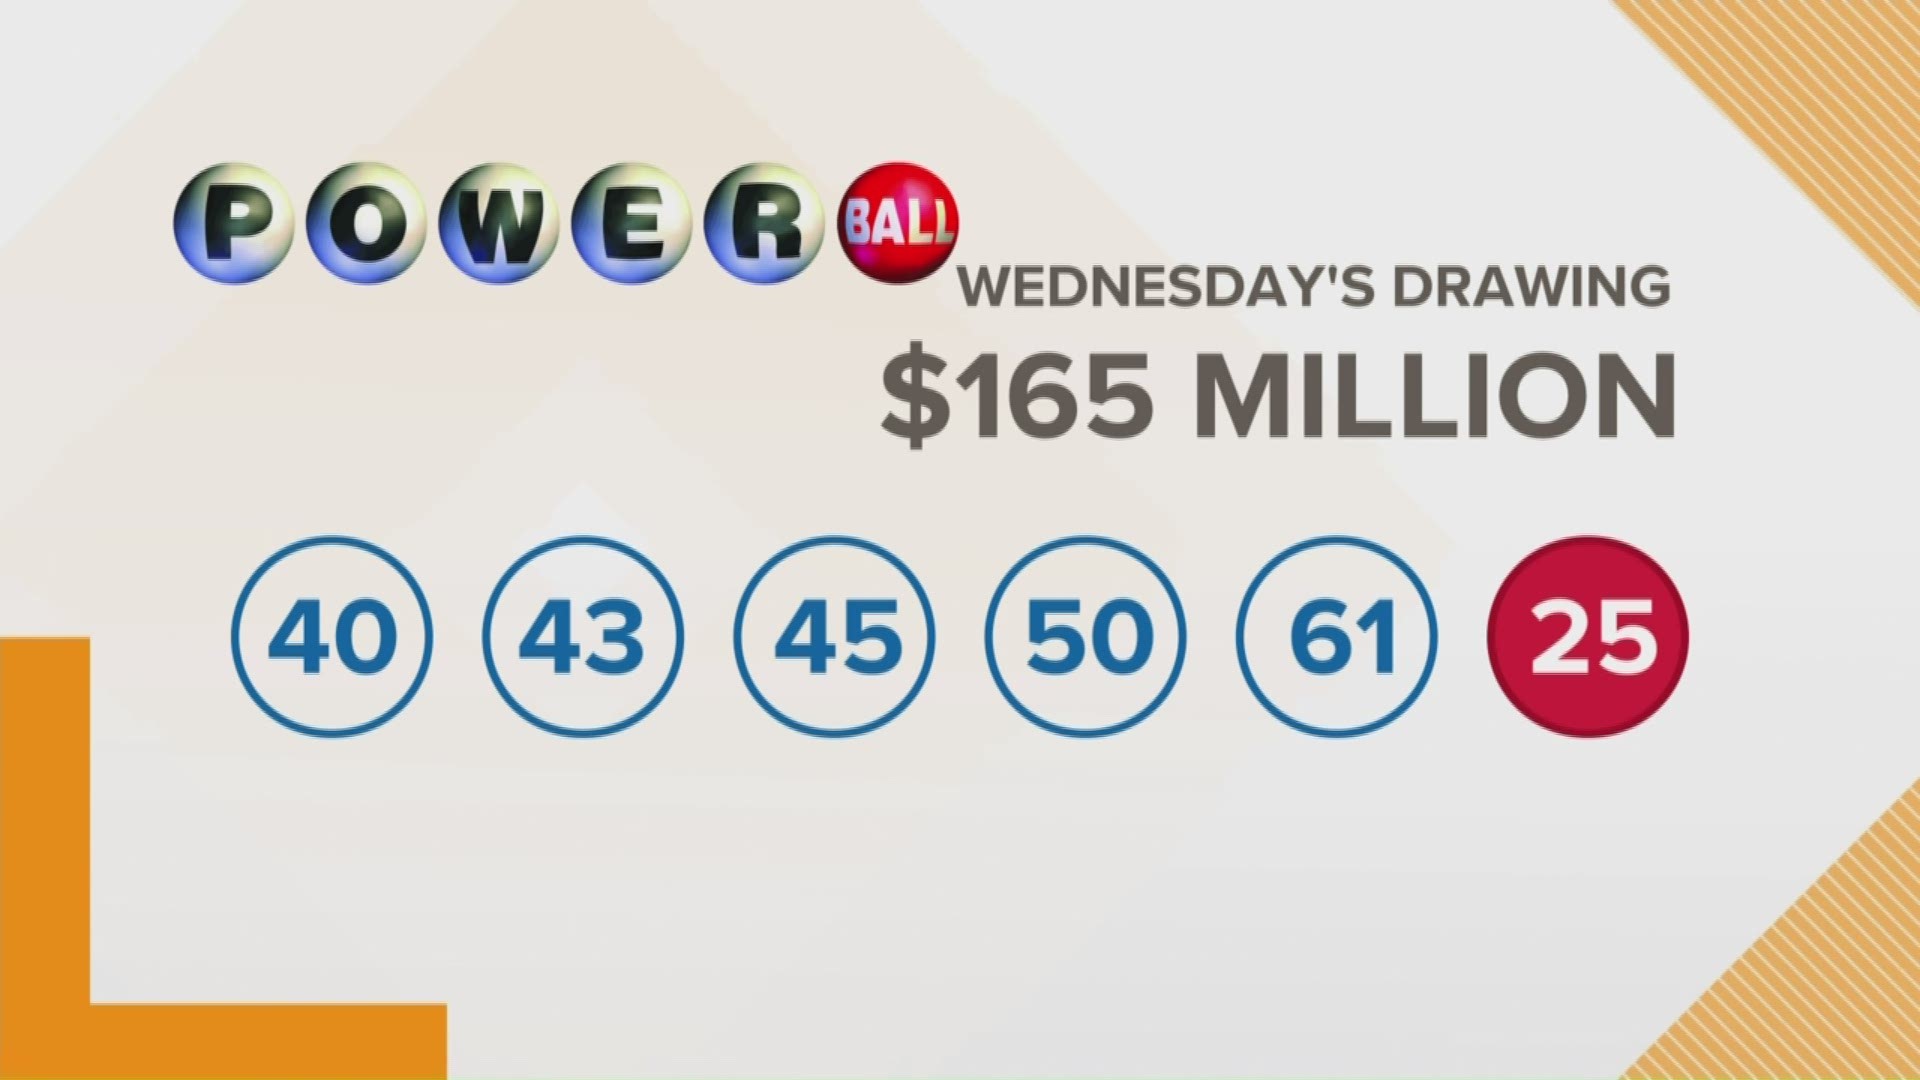 Check your tickets! One Powerball lottery player in South Carolina is $2 million richer after Wednesday night's drawing.